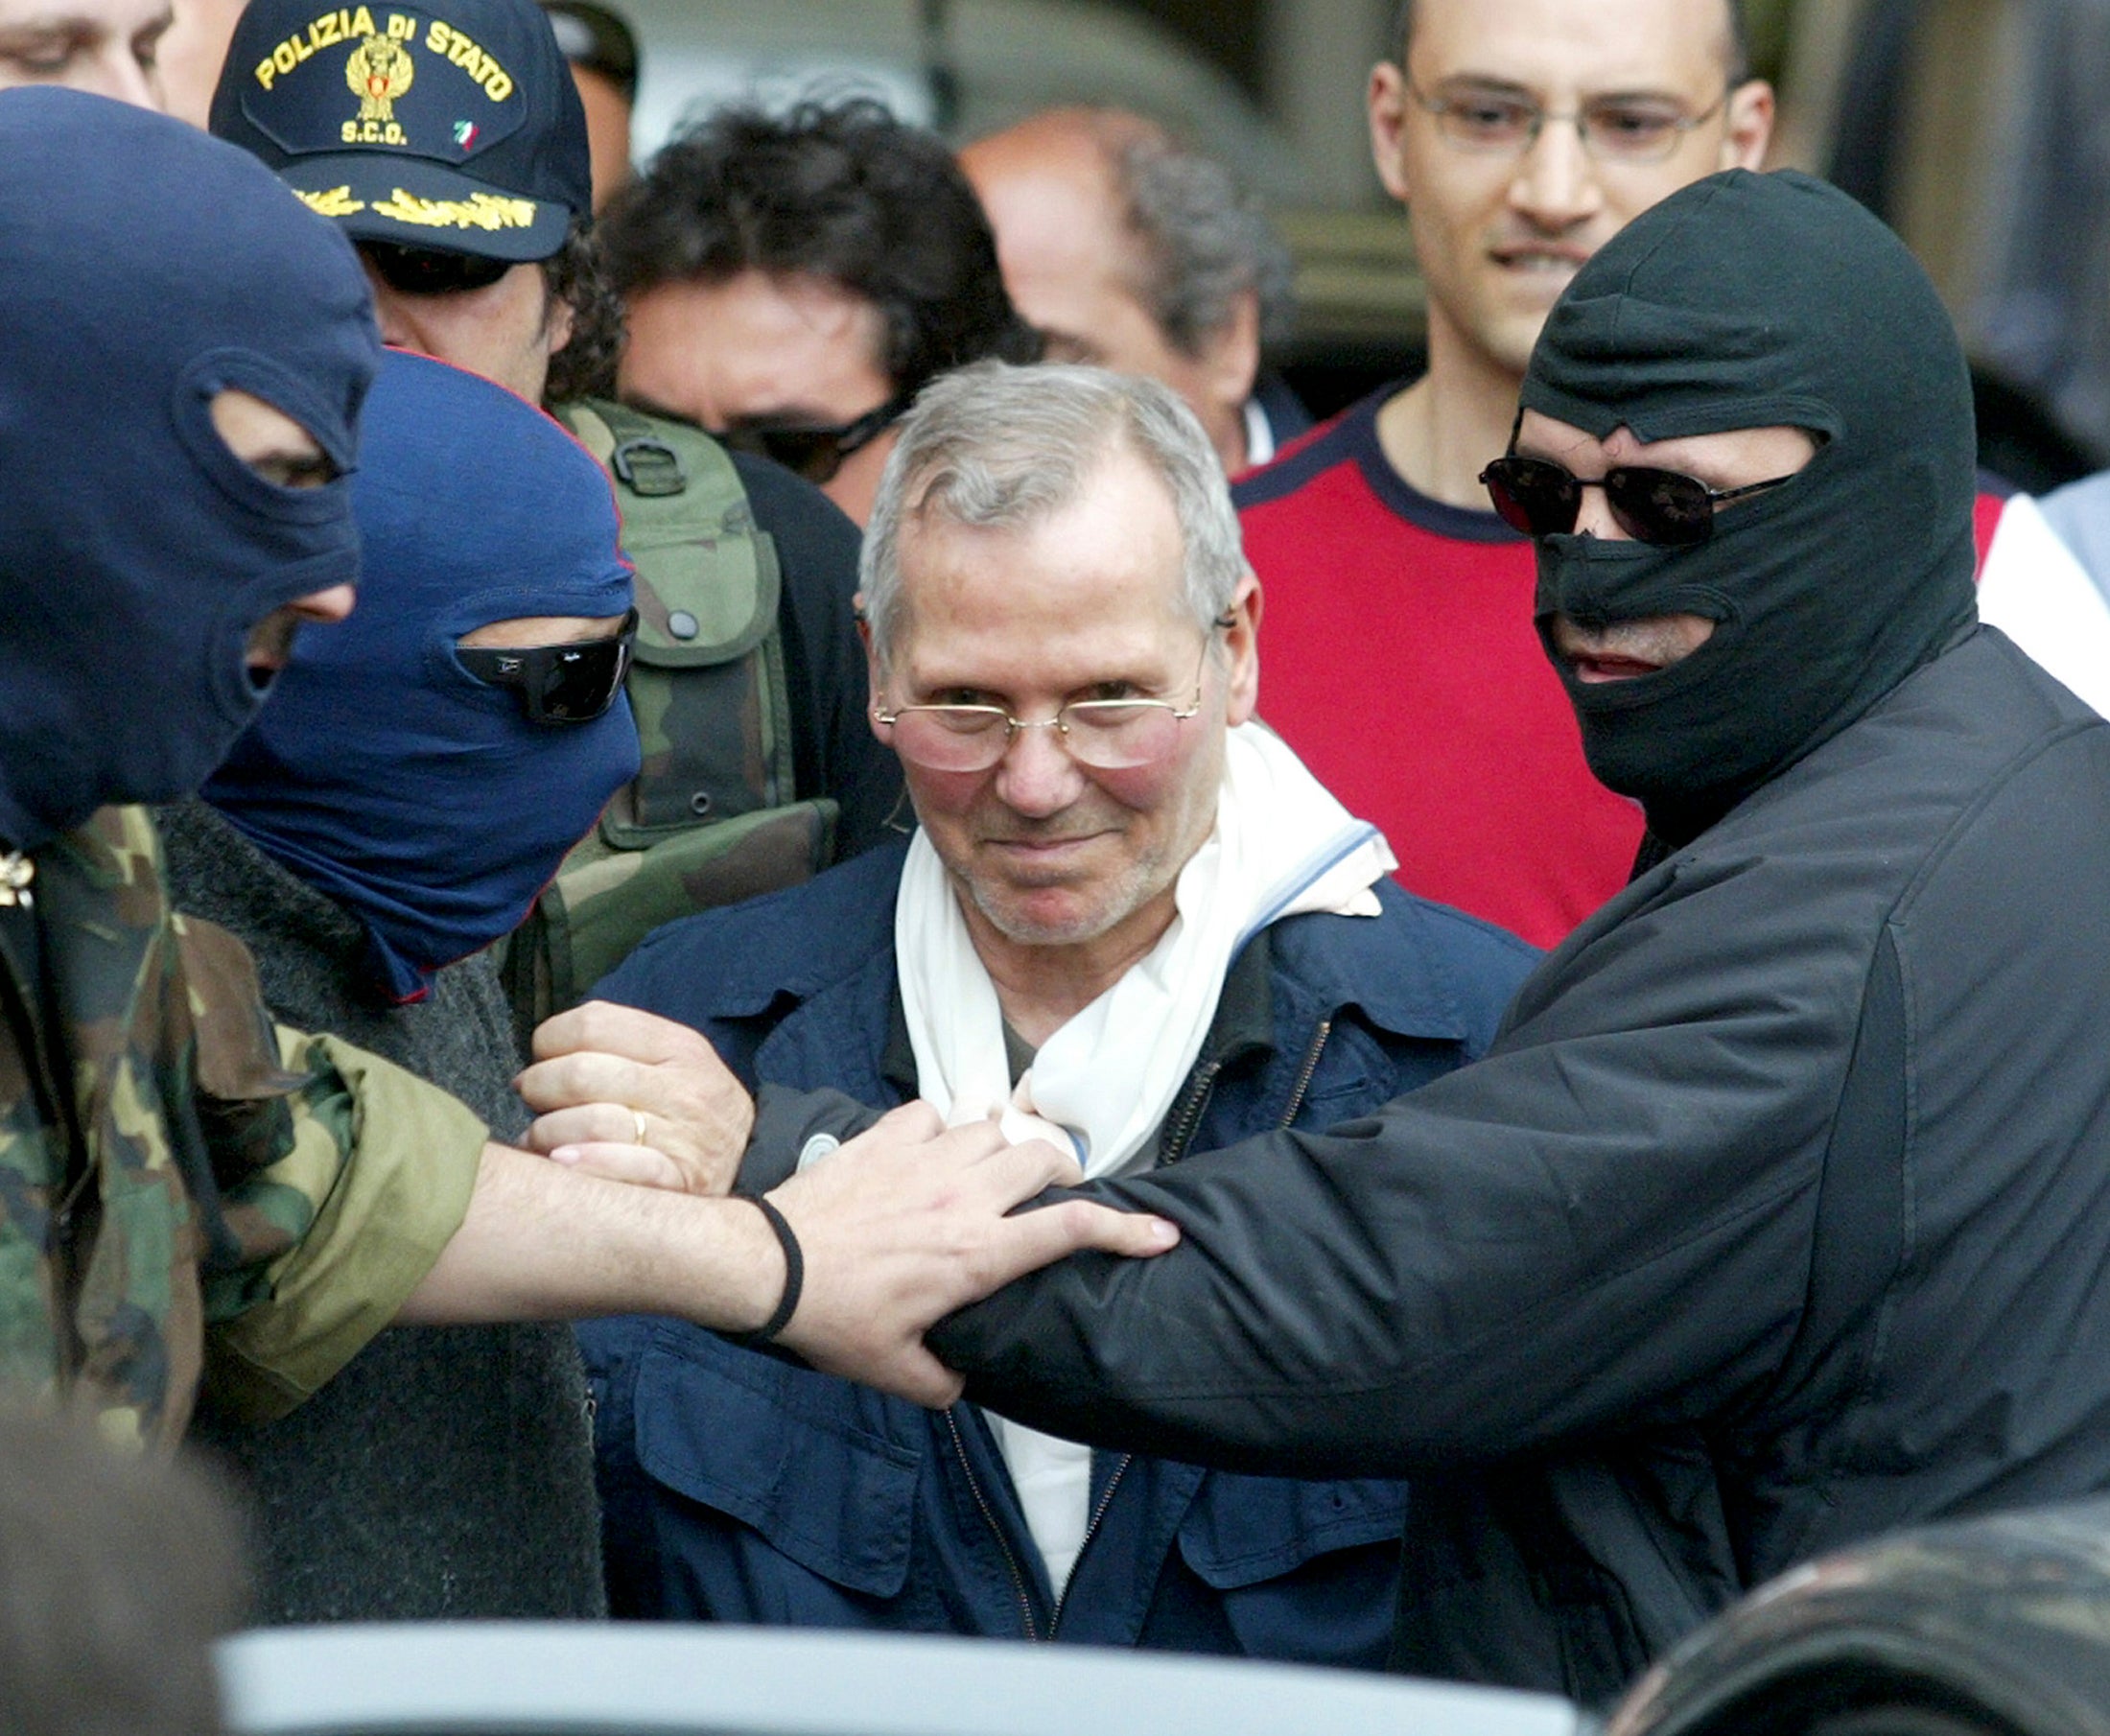 Police officers lead Bernardo Provenzano from a police station in Palermo in 2006